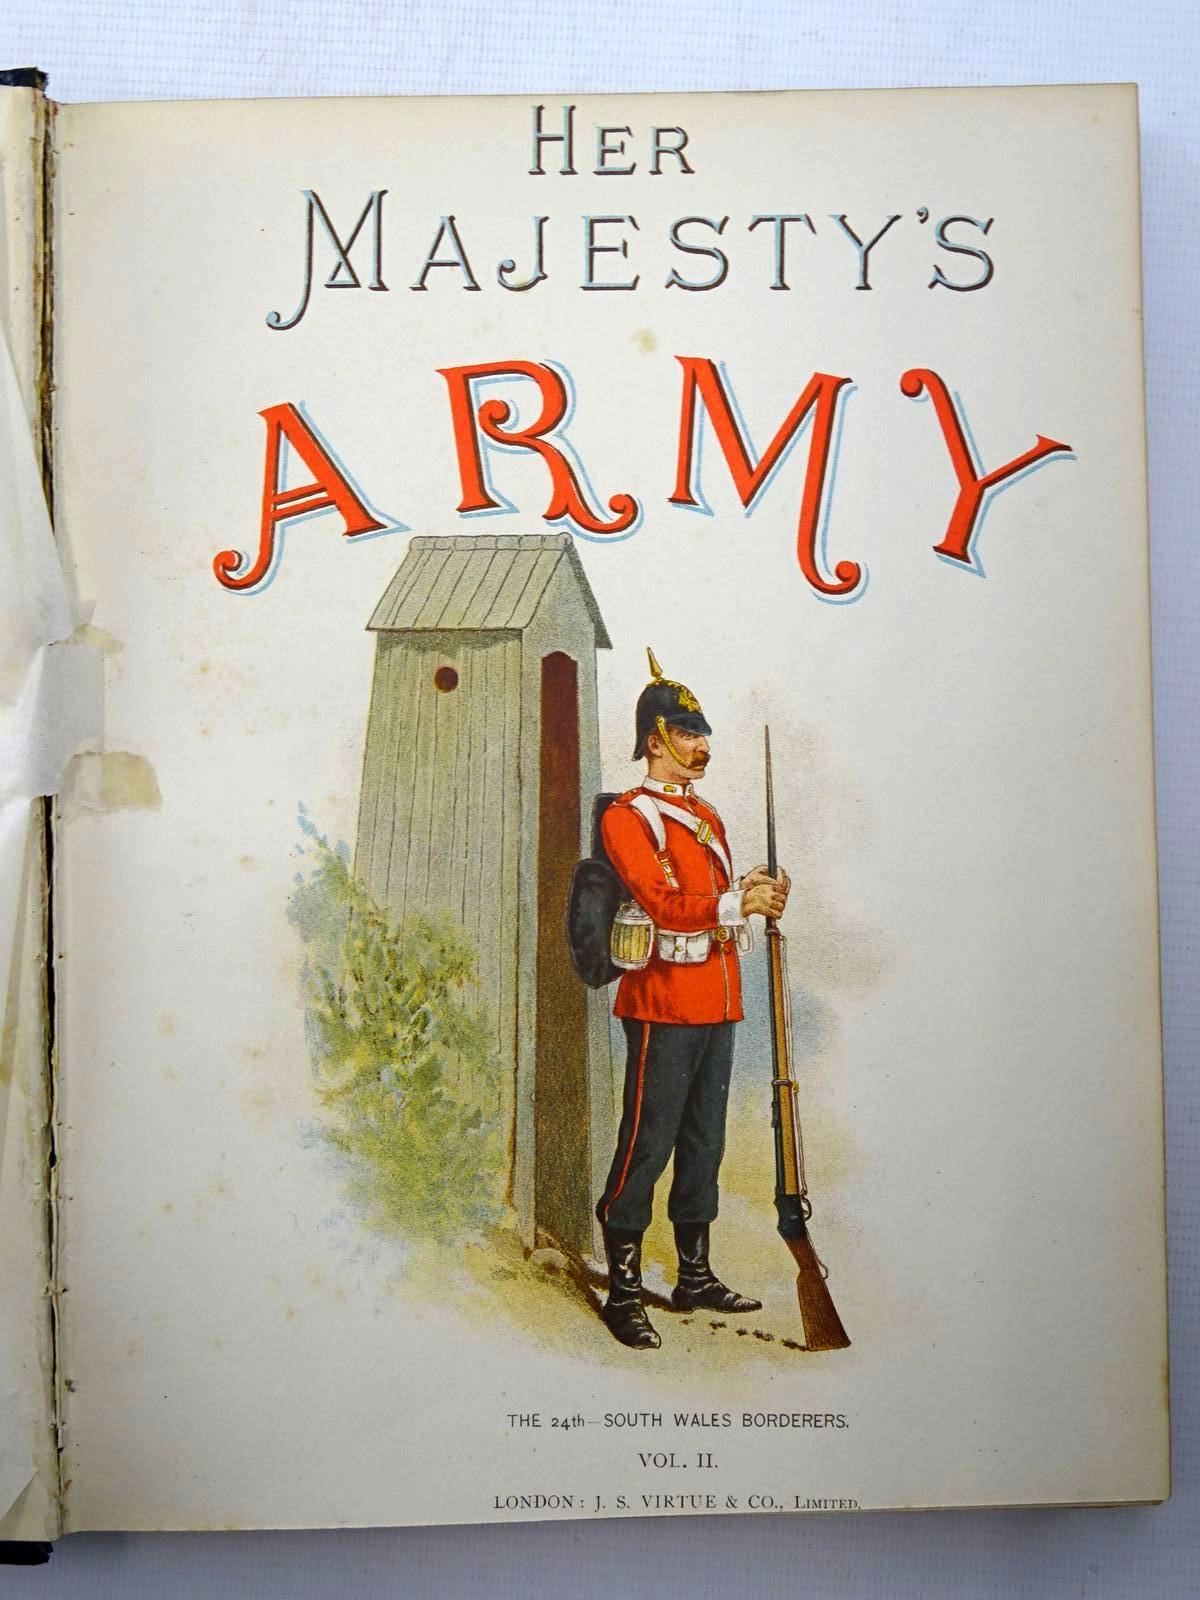 Photo of HER MAJESTY'S ARMY & HER MAJESTY'S INDIAN AND COLONIAL FORCES (3 VOLUMES) written by Richards, Walter illustrated by Giles, G.D. published by J.S. Virtue & Co Limited (STOCK CODE: 1816293)  for sale by Stella & Rose's Books